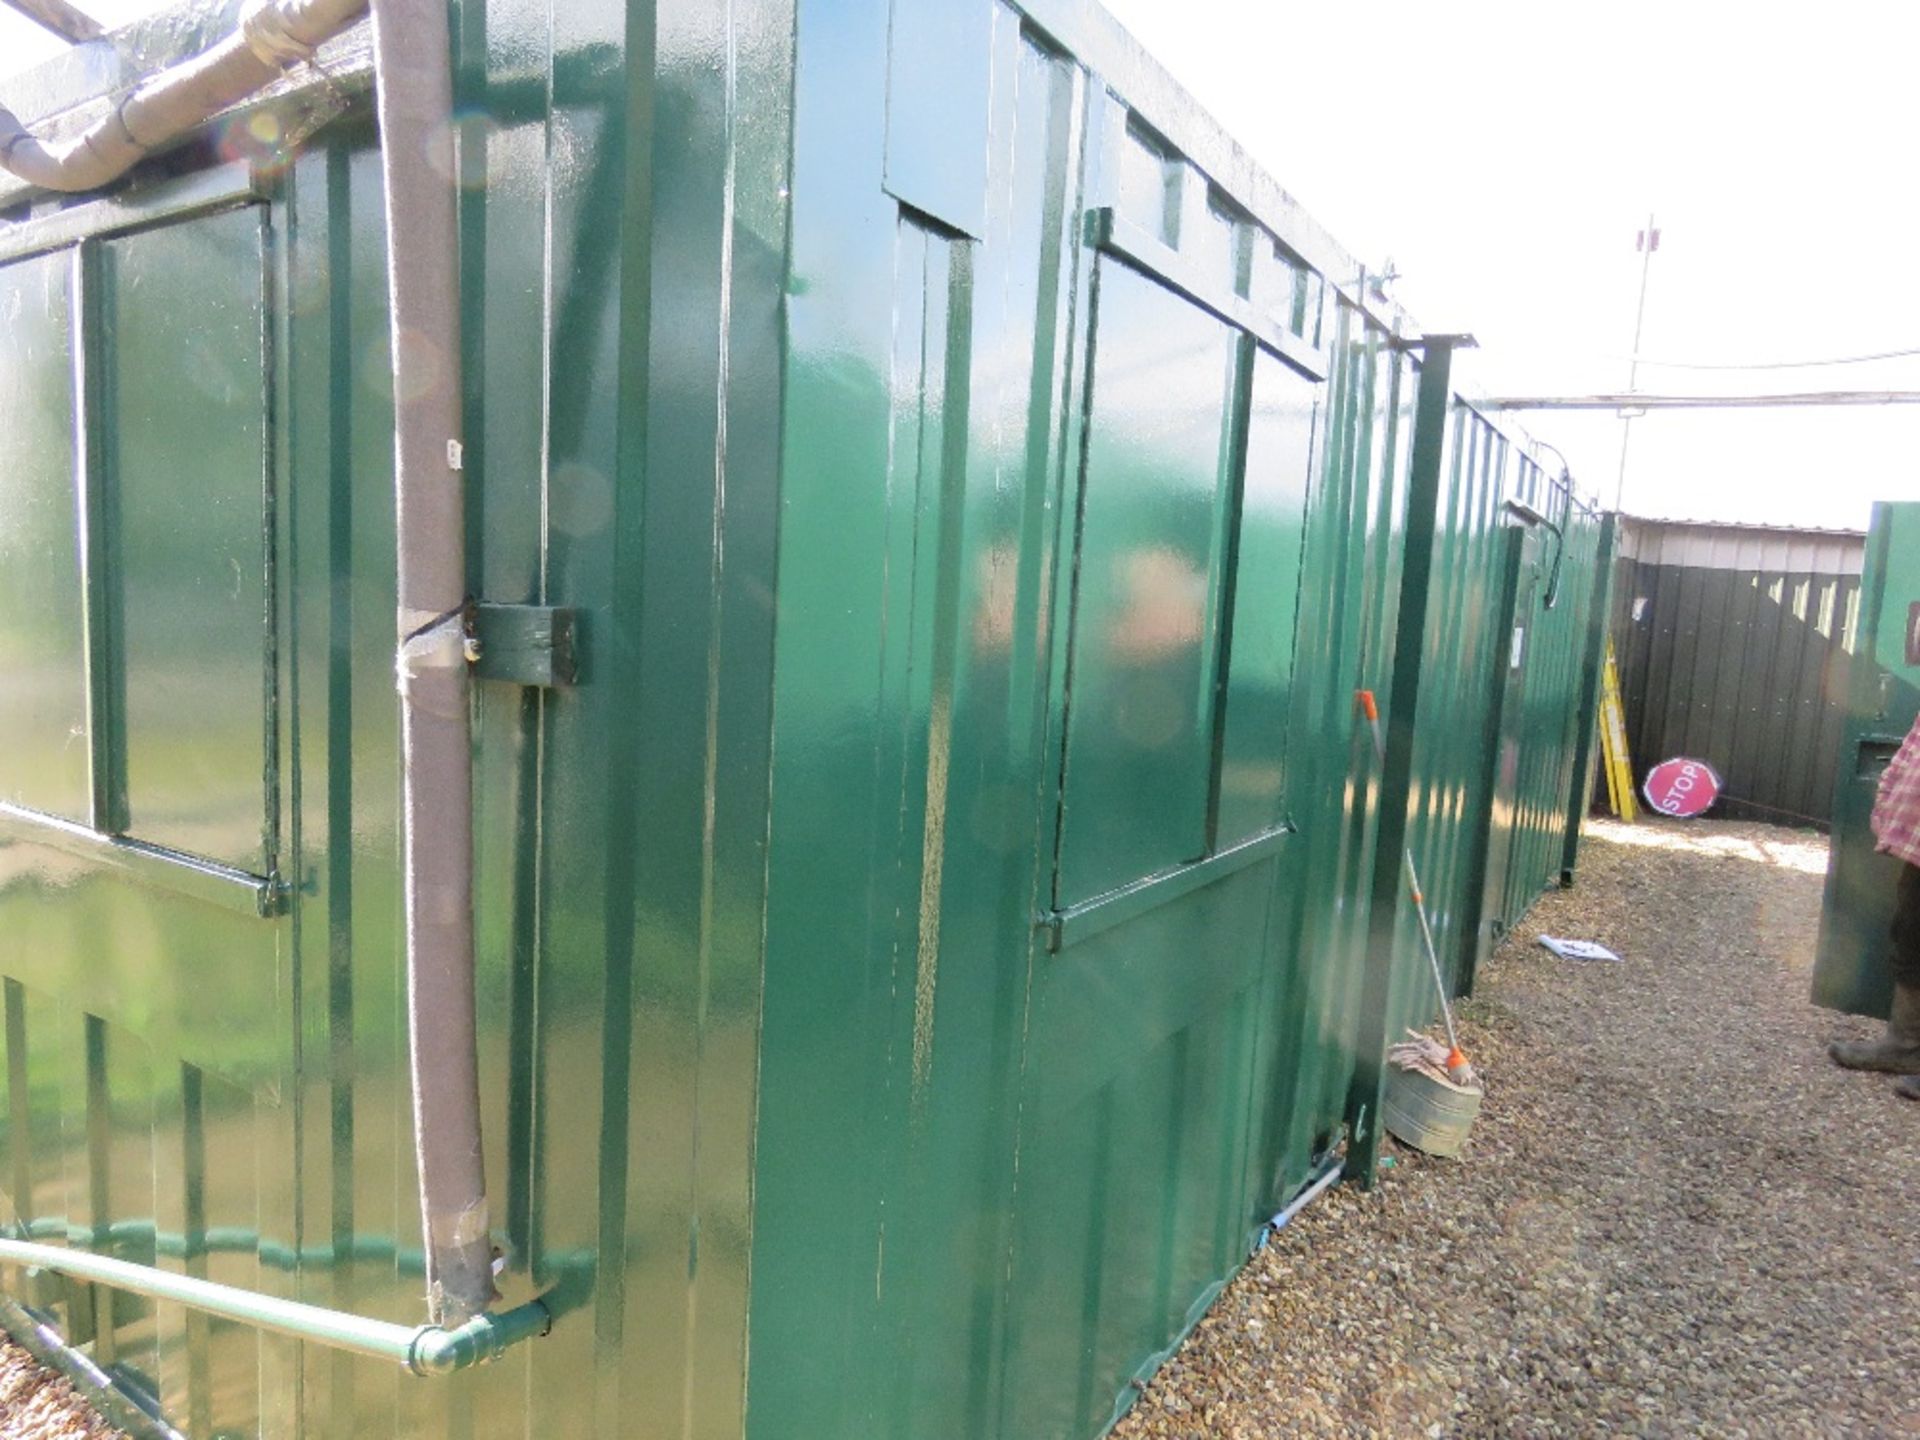 PORTABLE SITE OFFICE 32FT X 10FT APPROX WITH SMALL KITCHEN AREA AT ONE END. 60/40 SPLIT APPROX AS SH